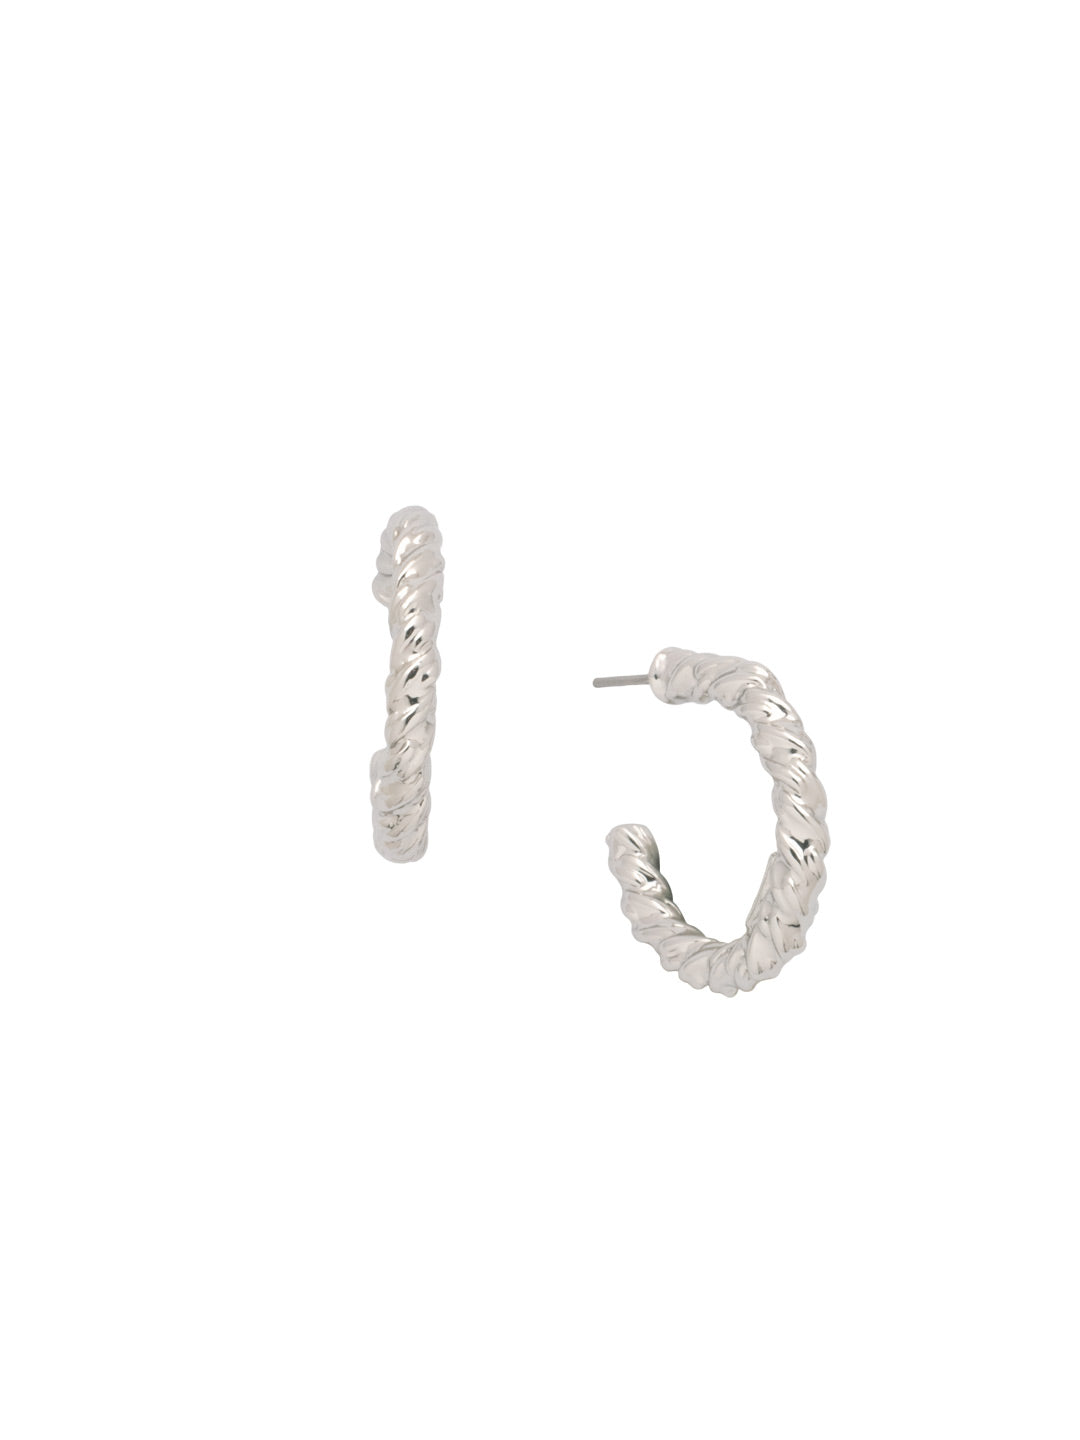 Olive Hoop Earrings - 4EFJ13PDMTL - <p>The Olive Hoop Earrings resemble a textured rope chain, secured on a classic post back. From Sorrelli's Bare Metallic collection in our Palladium finish.</p>